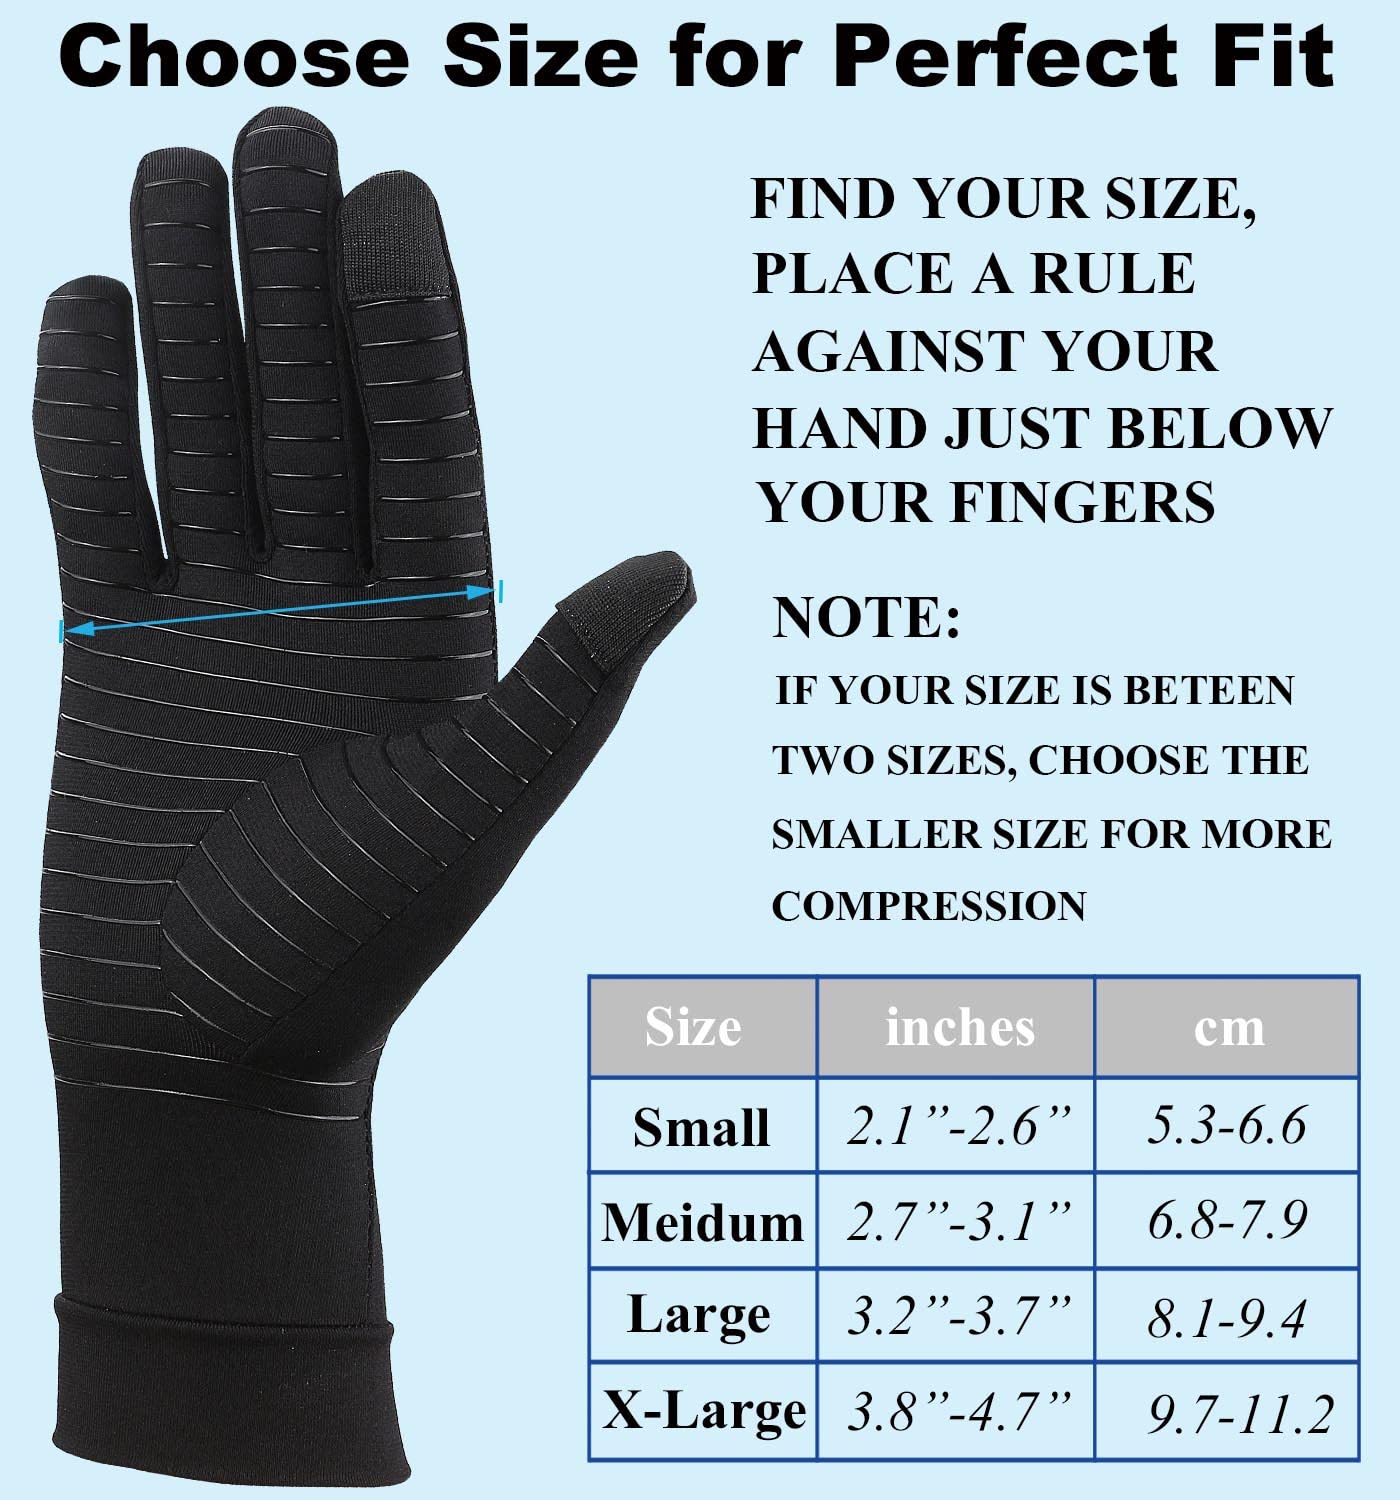 2 Pairs Full Finger Copper Arthritis Gloves with Touchscreen Tip, Compression Gloves for Women Men, Relief for Rheumatoid, Osteoarthritis, Carpal Tunnel, Hand Pain, Tendonitis, Computer Typing